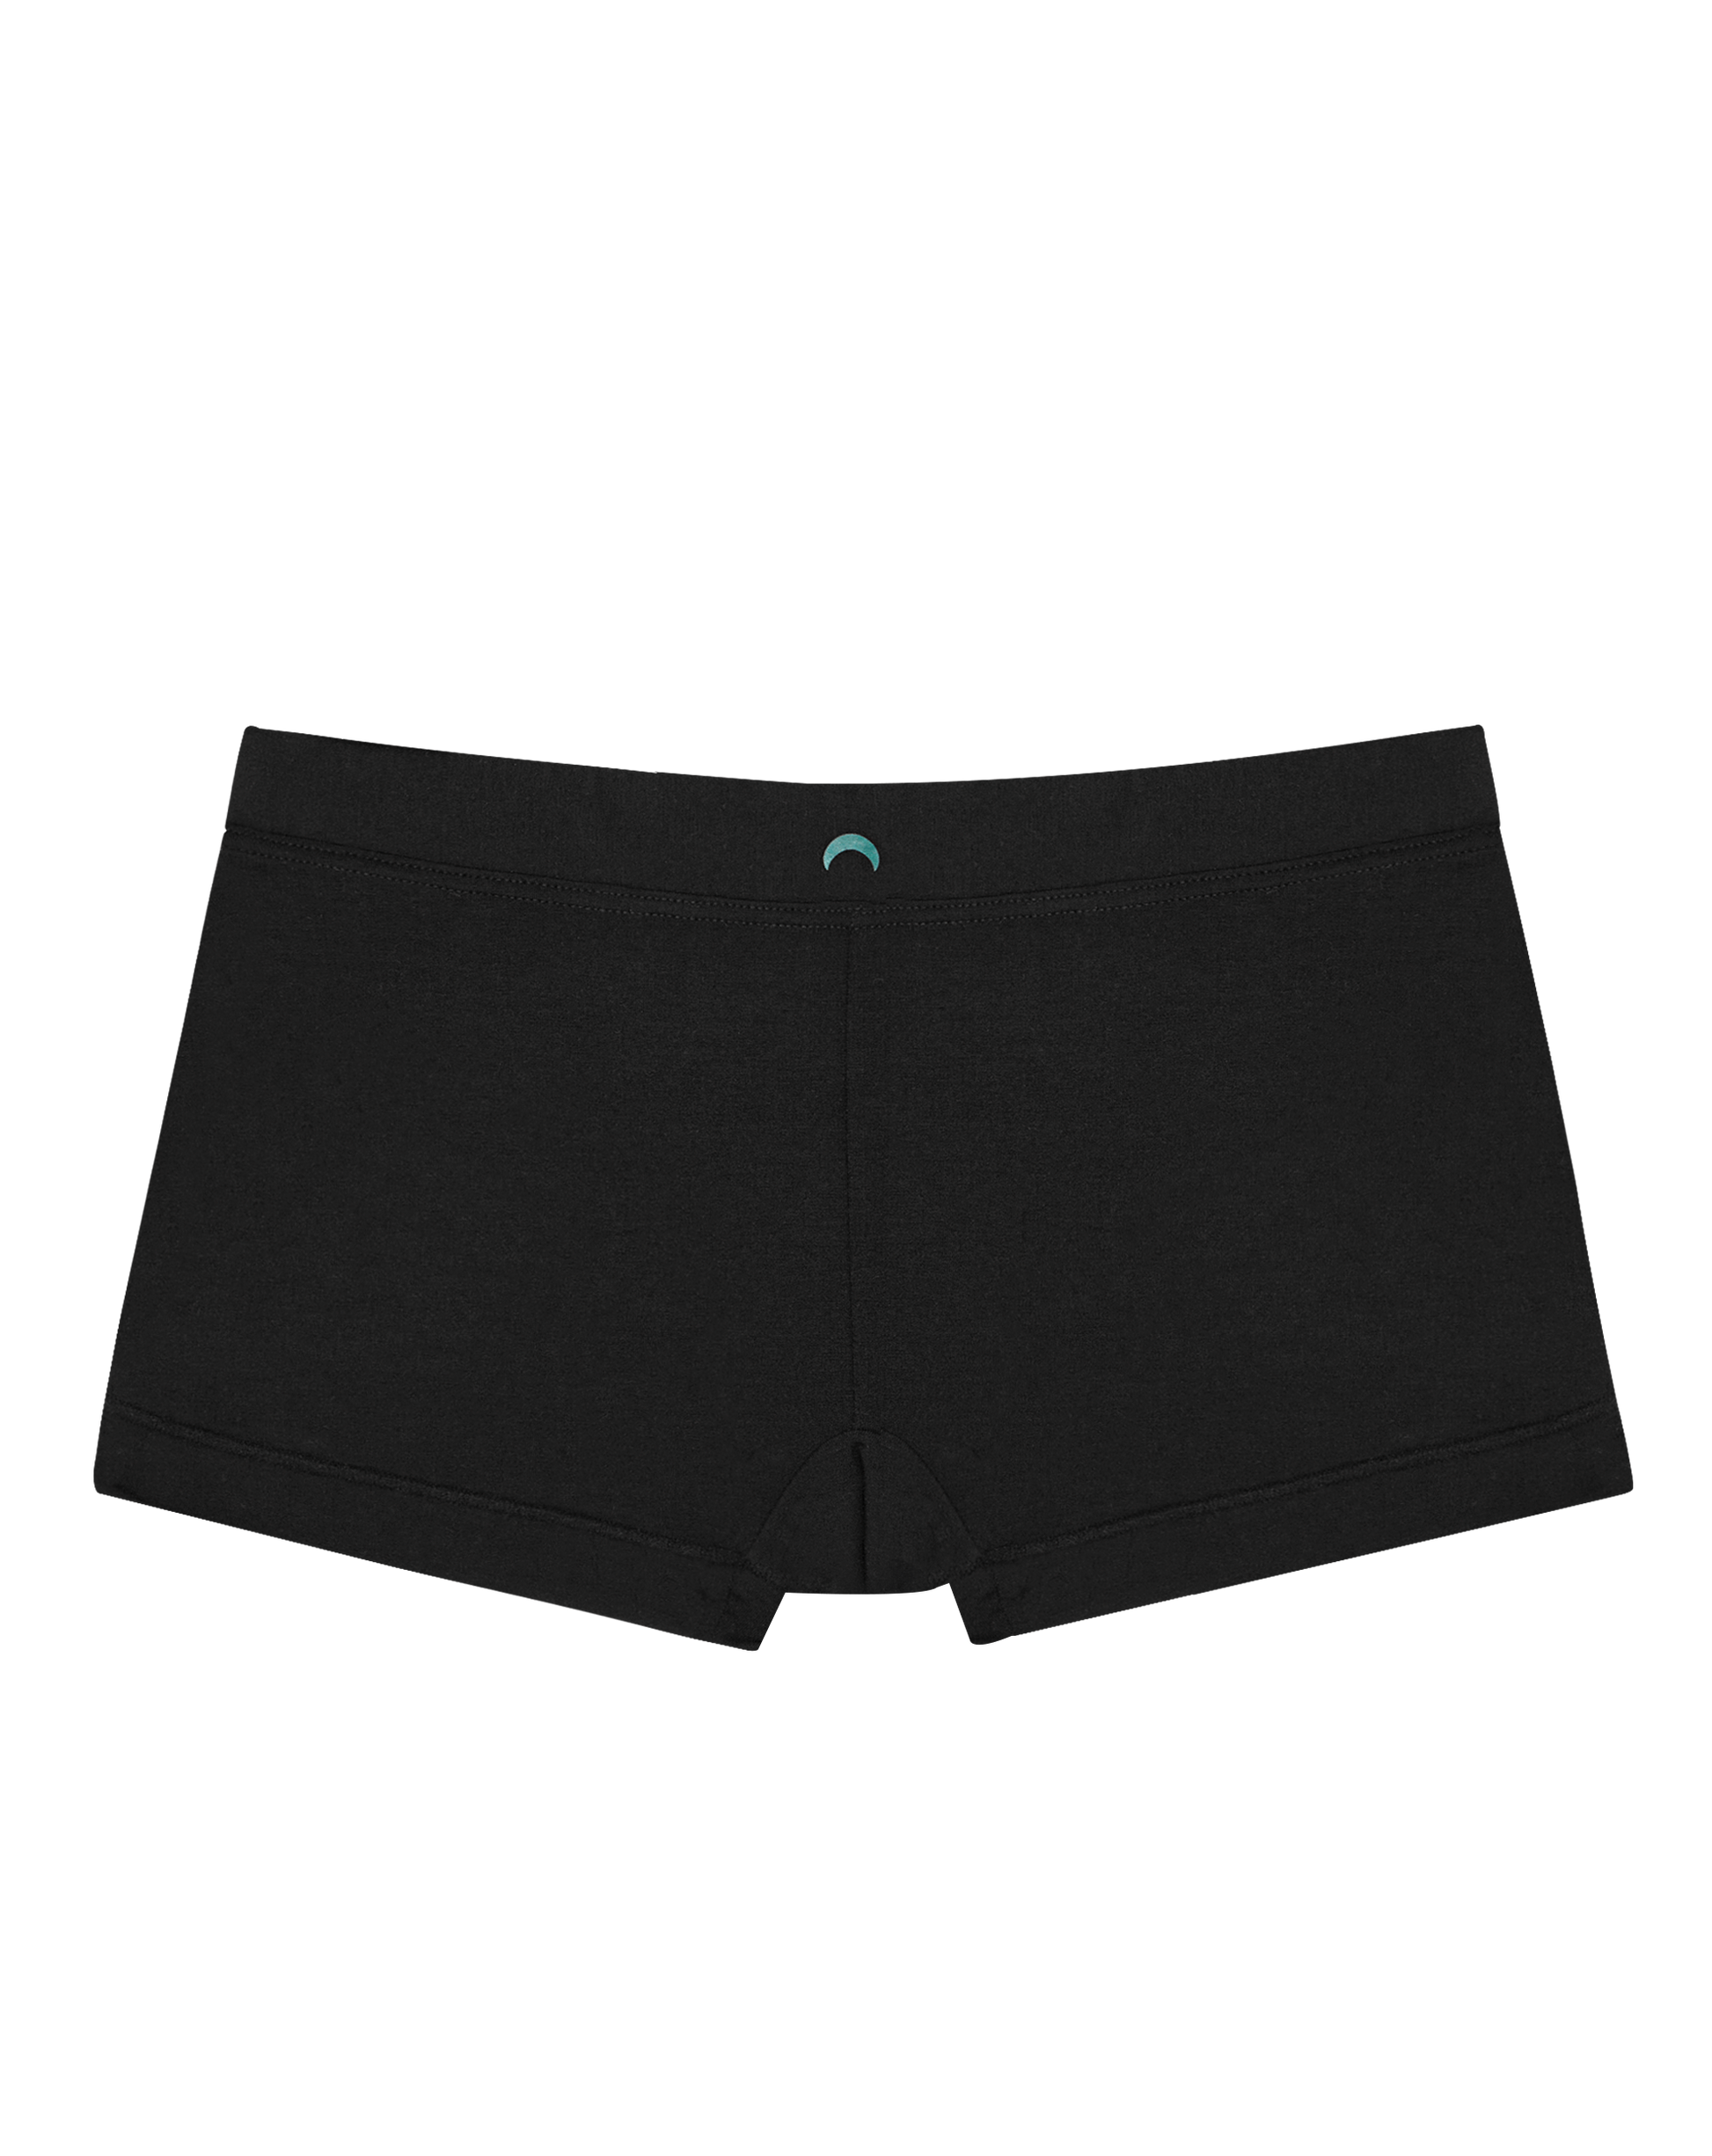 Review: We Tried Richer Poorer's Femme Boxers and Loved Lounging